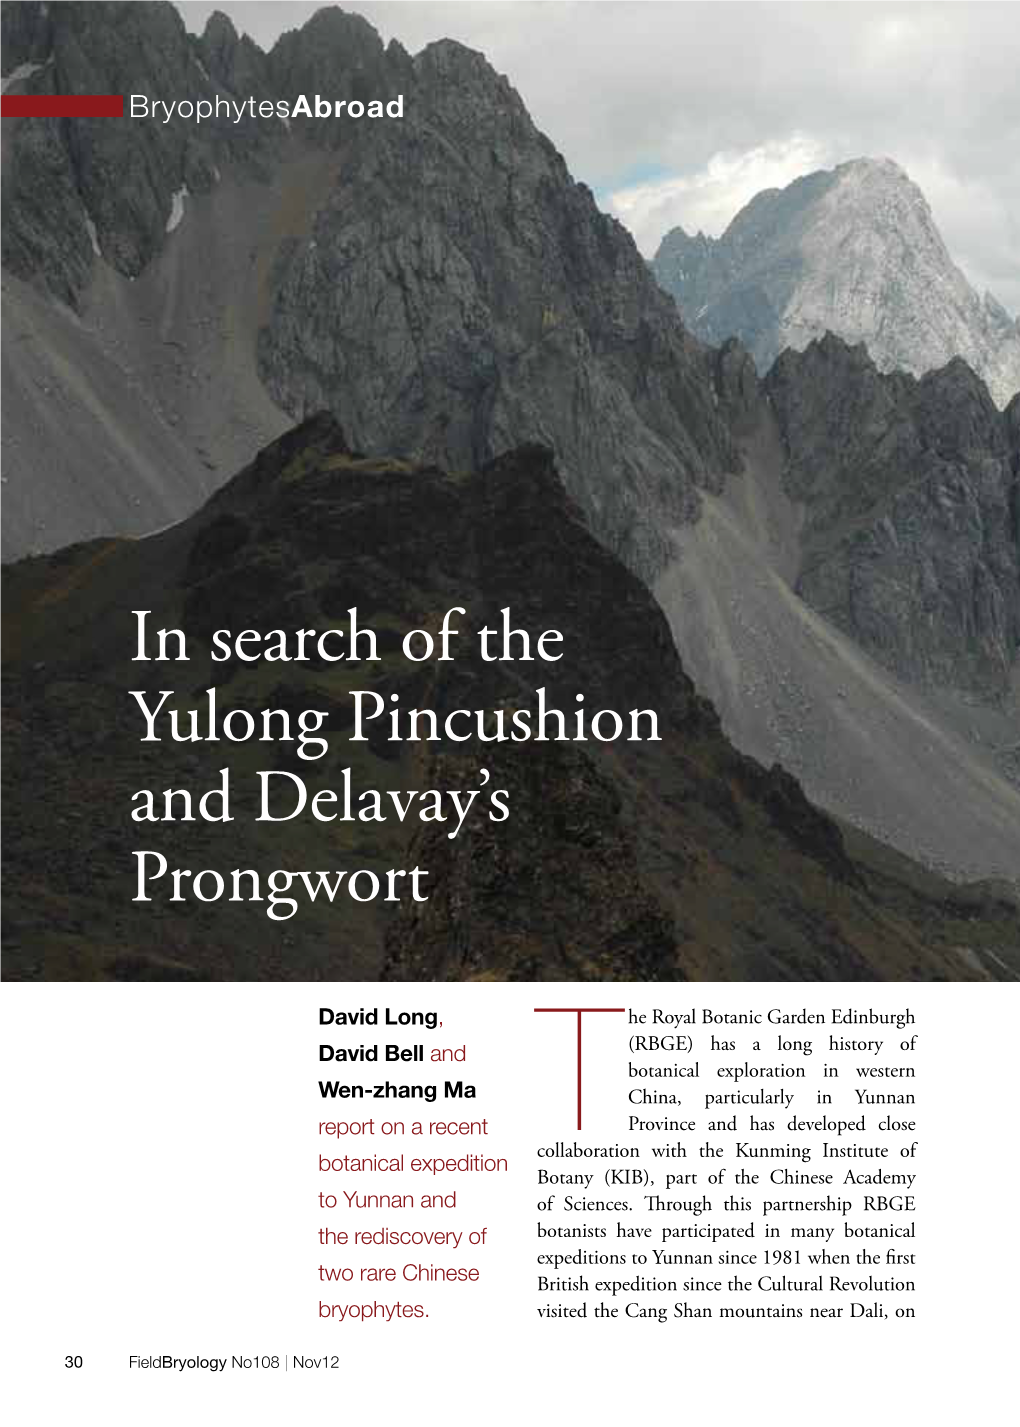 In Search of the Yulong Pincushion and Delavay's Prongwort